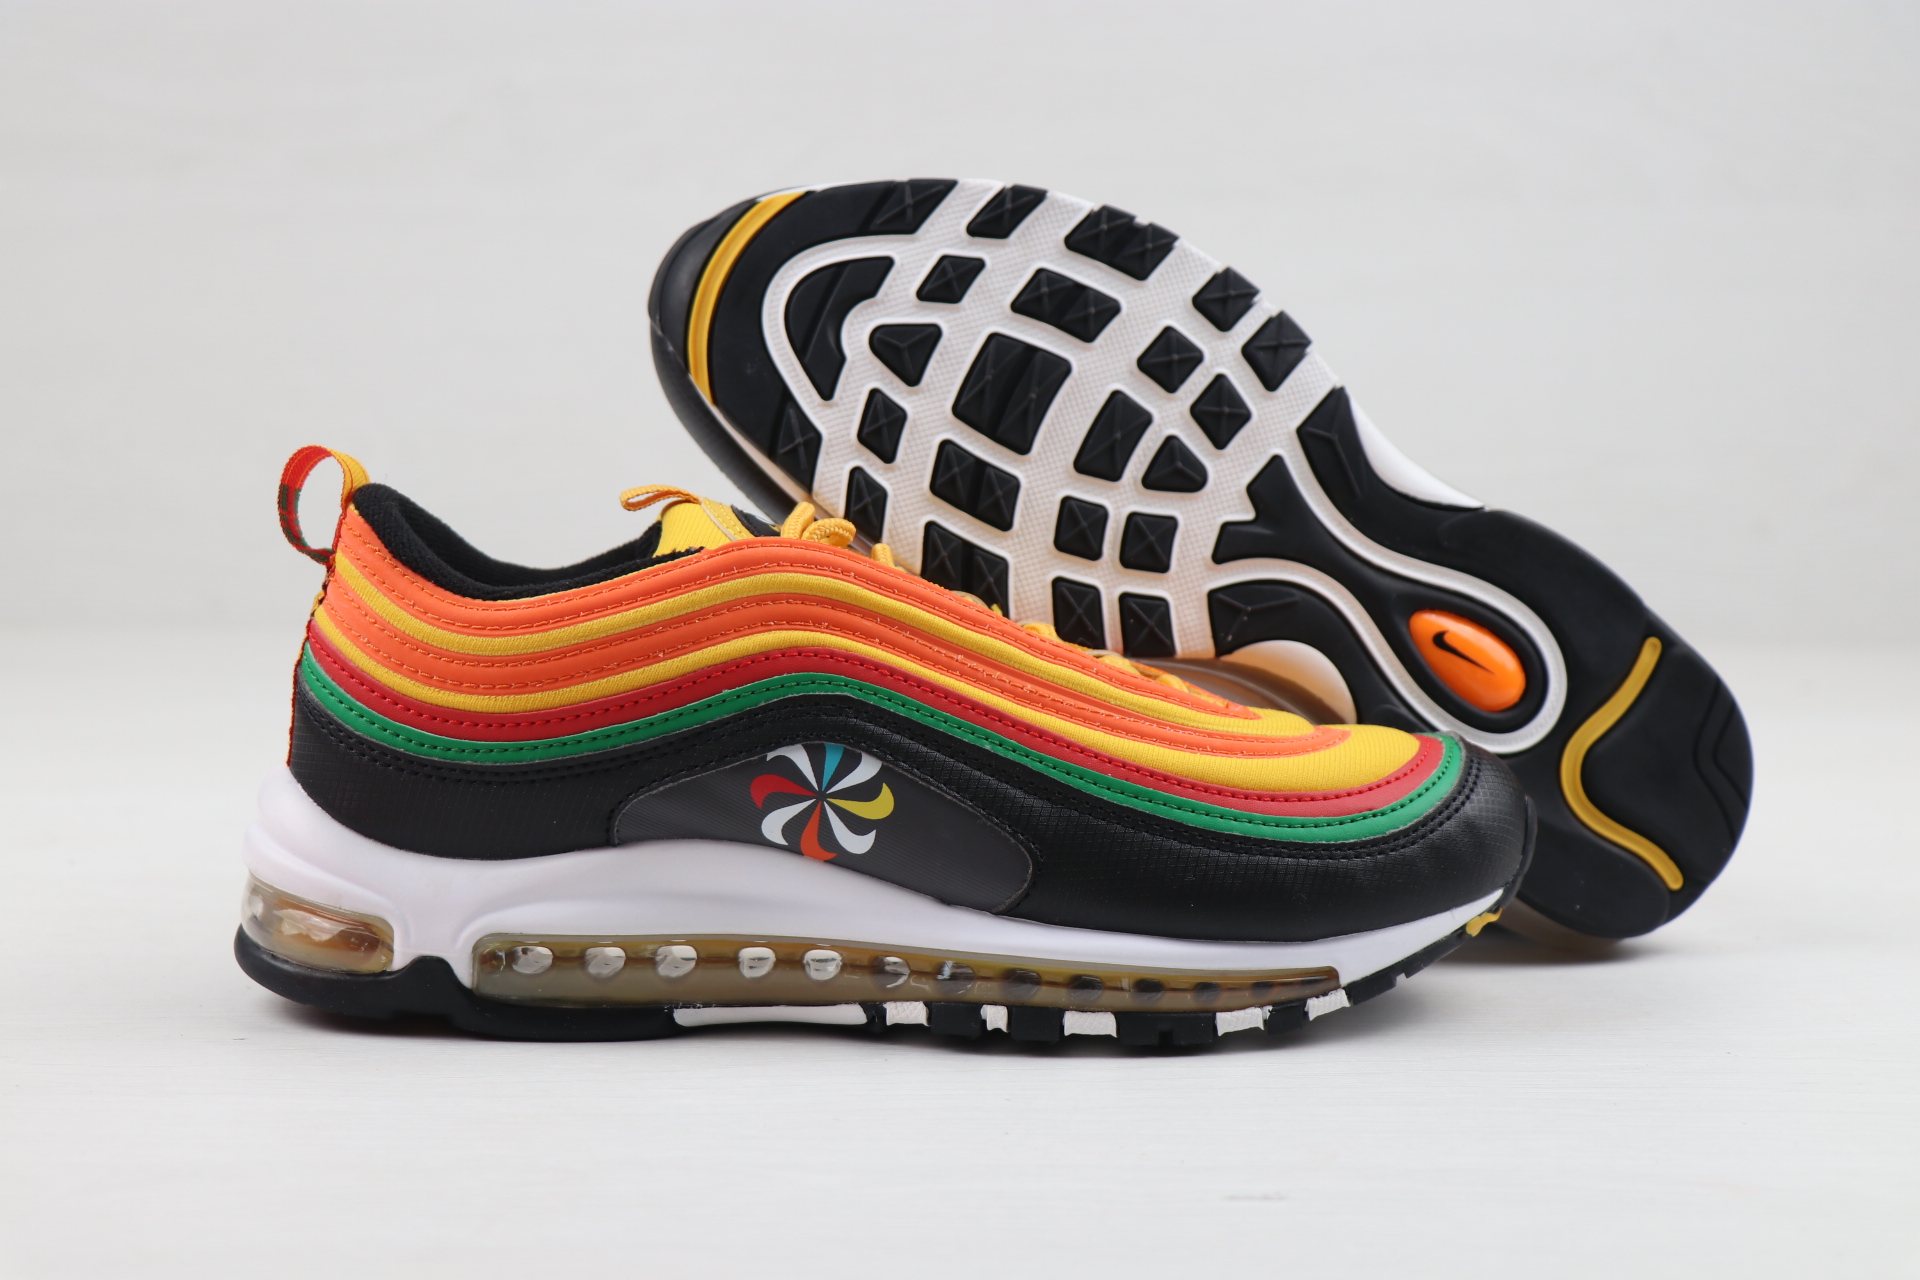 Men's Running weapon Air Max 97 Shoes 018